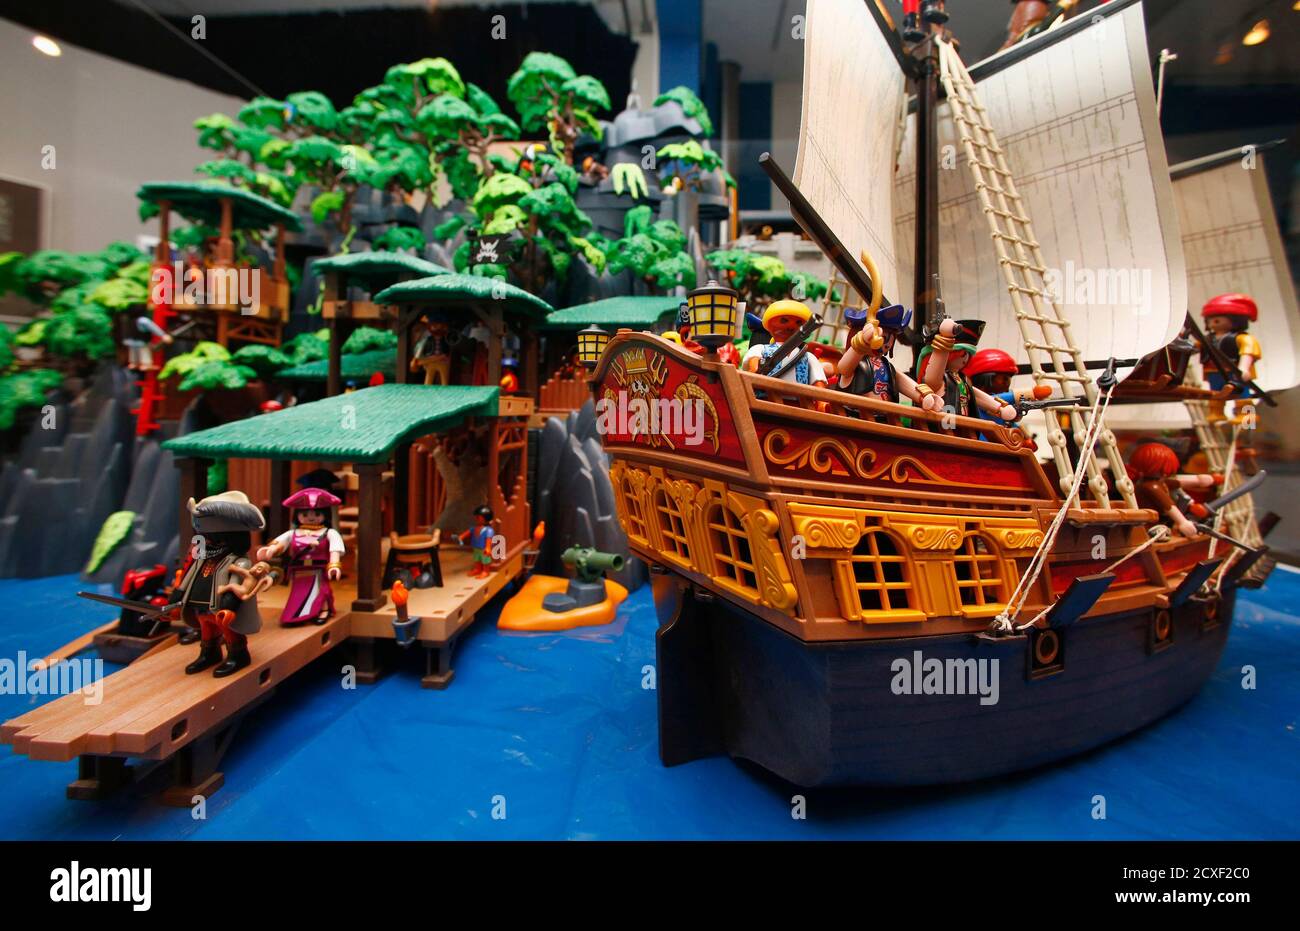 Playmobil toys are displayed during an exhibition at the toy museum in  Nuremberg April 9, 2014. Playmobil is celebrating its 40th anniversary in  2014 and is produced by the German company Geobra